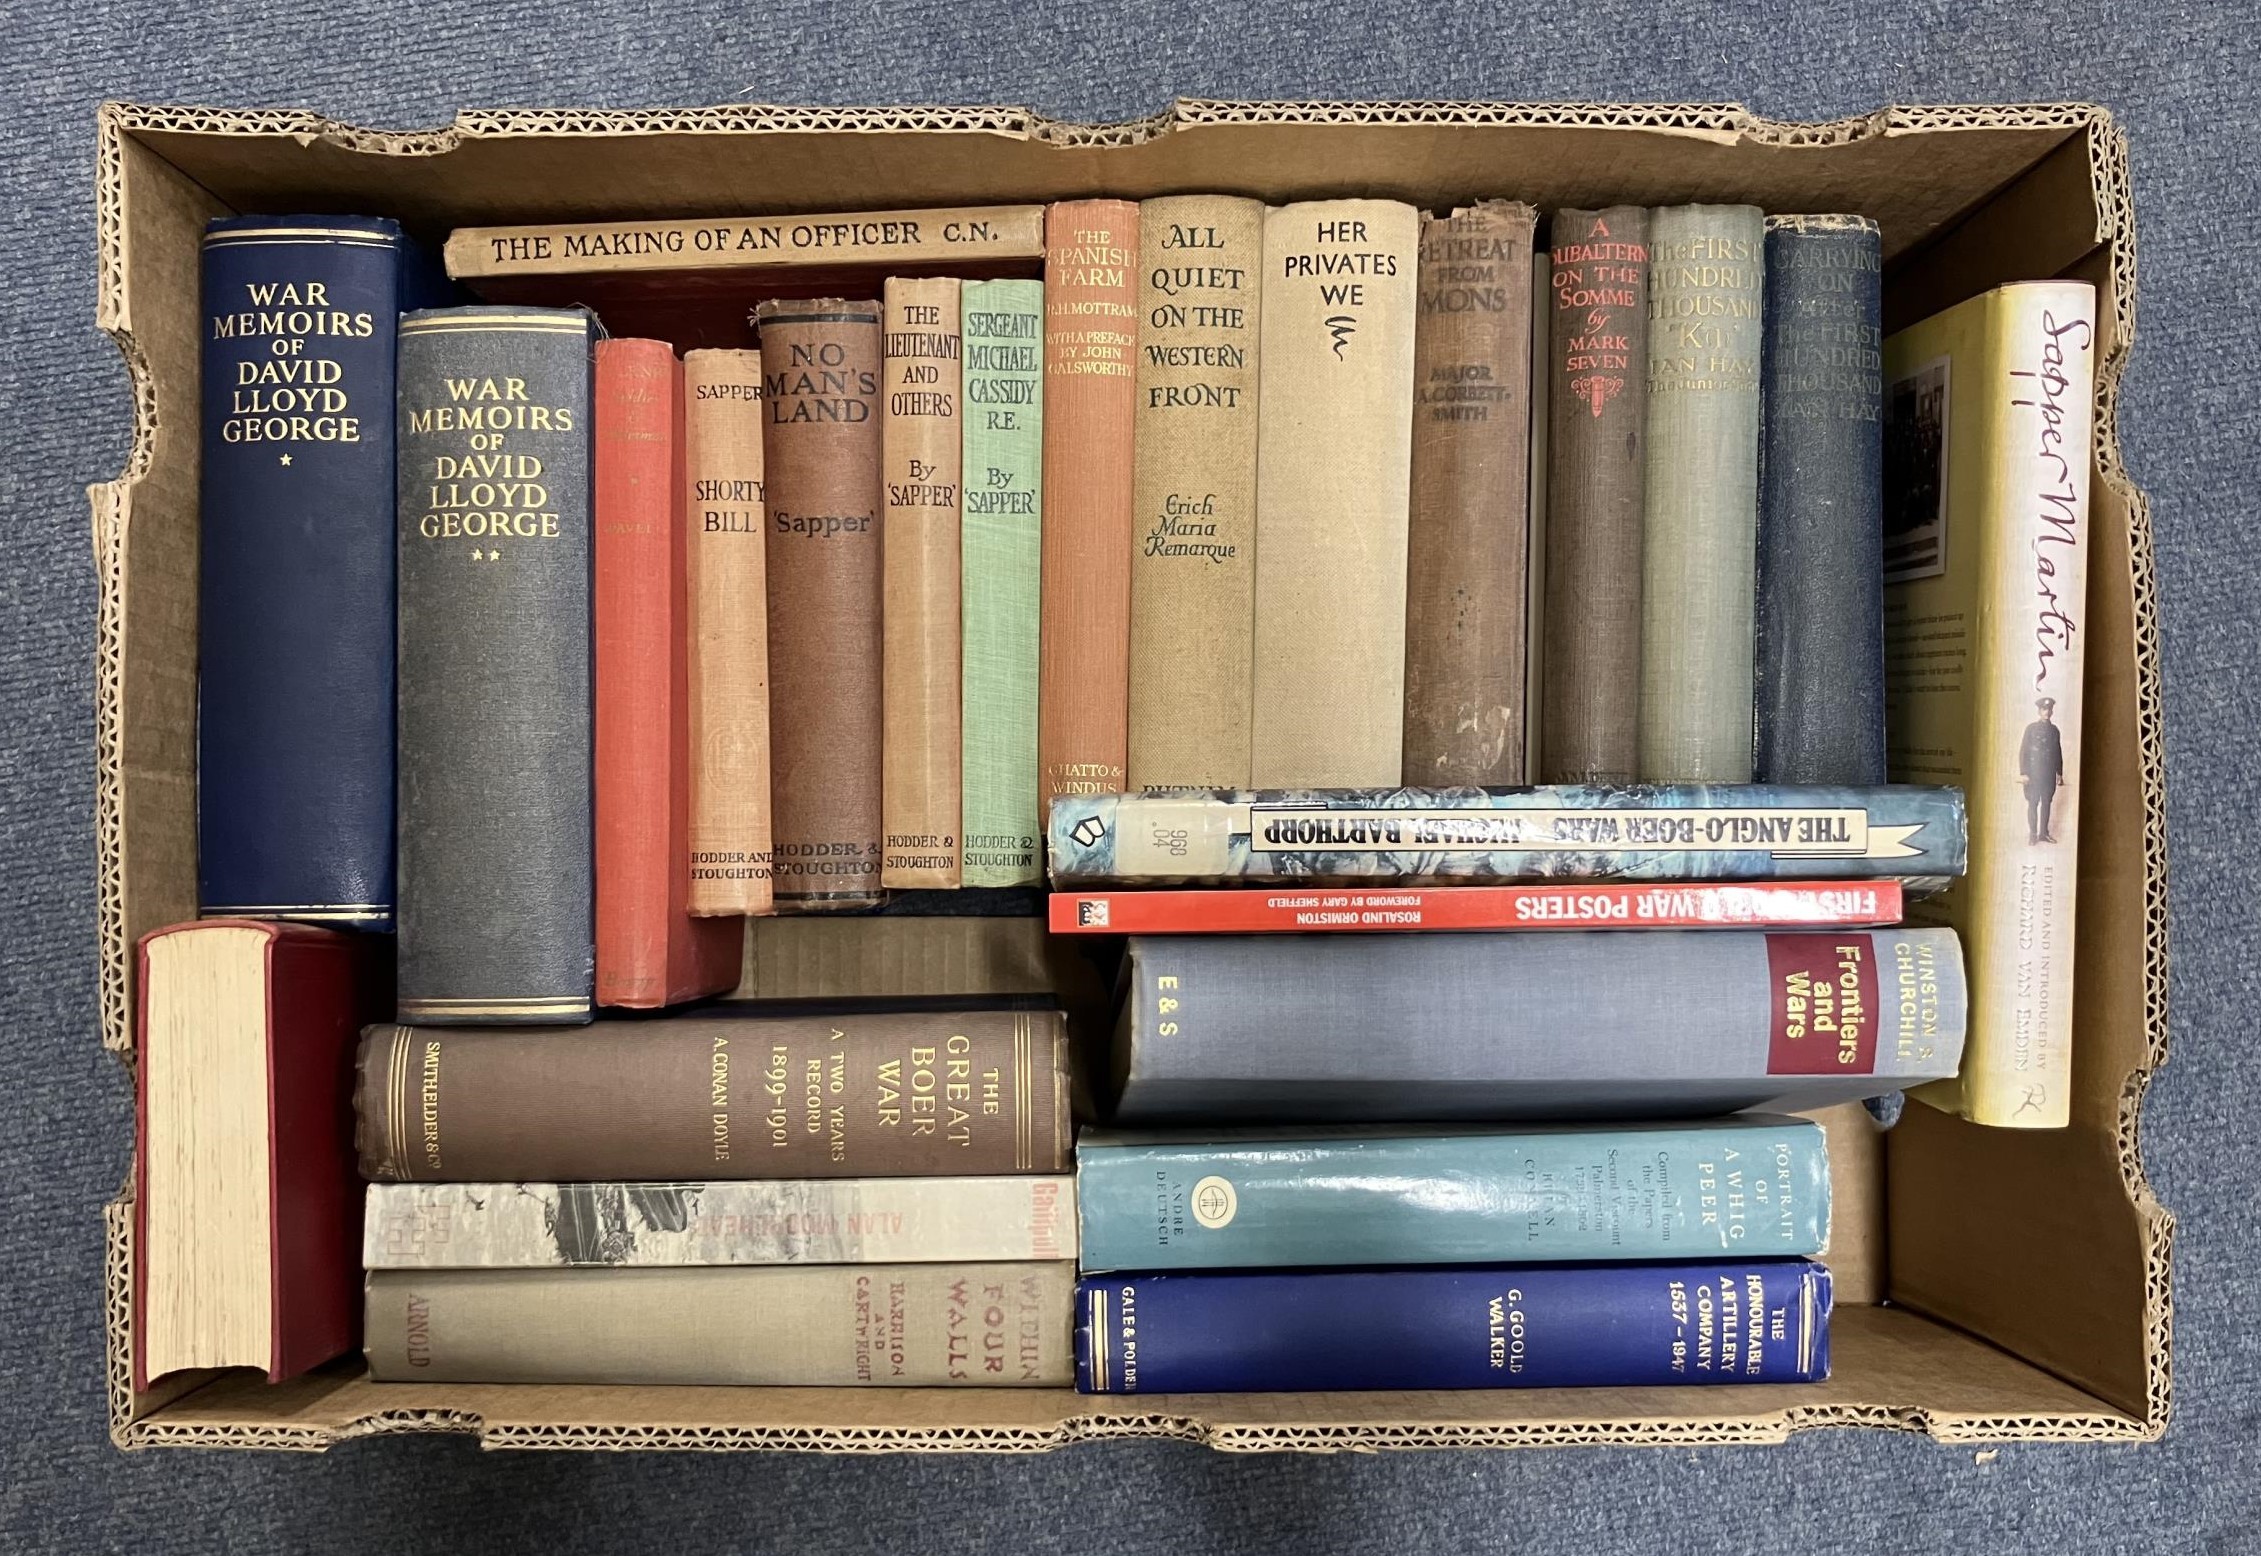 Assorted works by Churchill (Winston), and other military related books (6 boxes) - Image 6 of 9